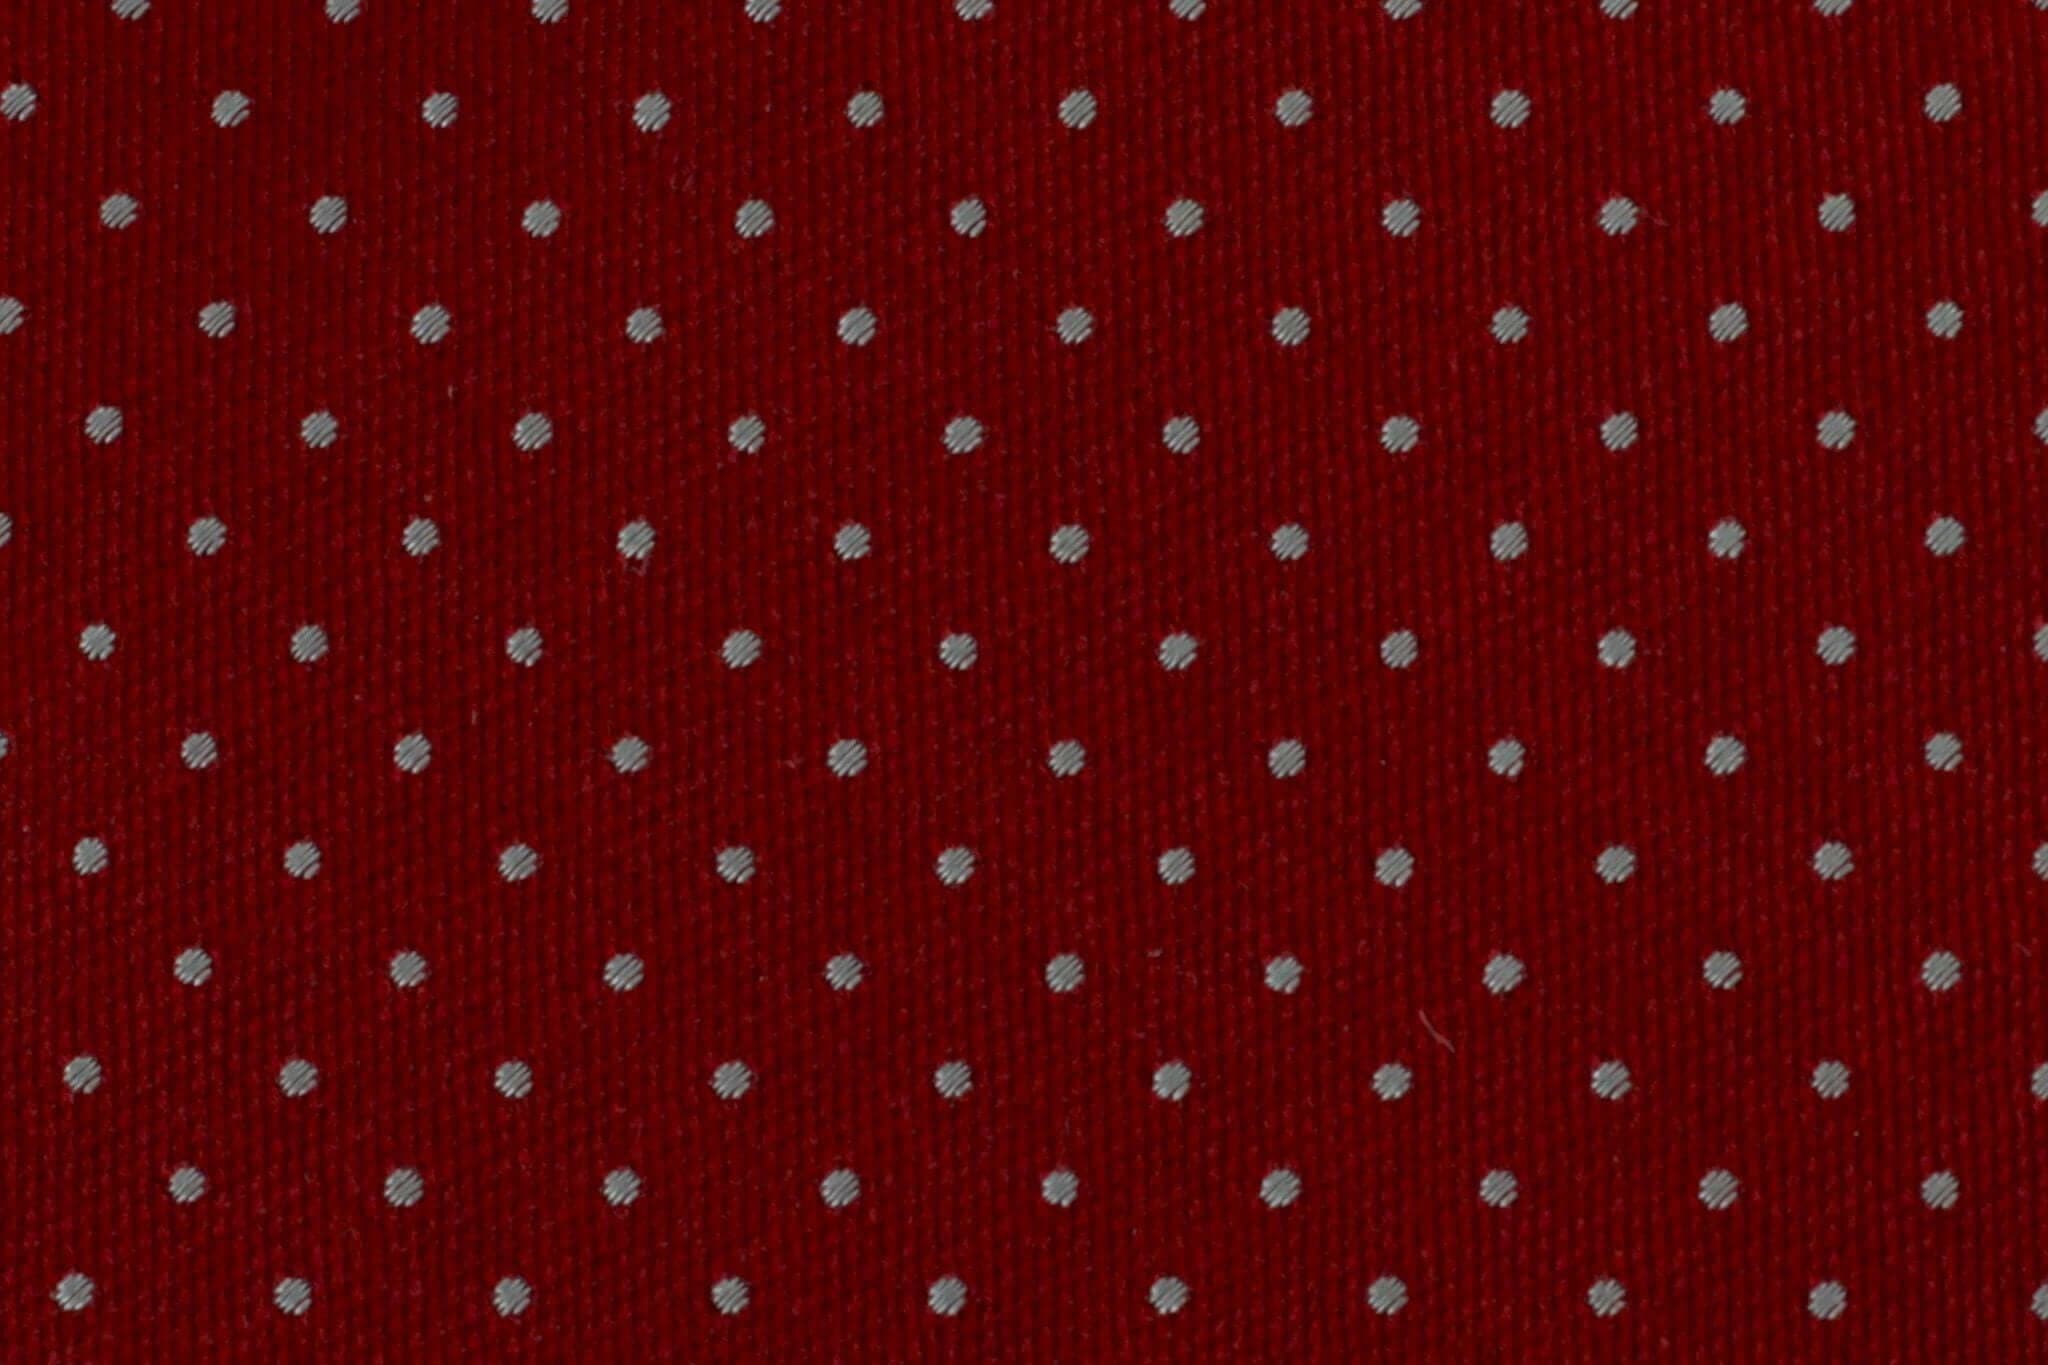 Red silk fabric zoom detail